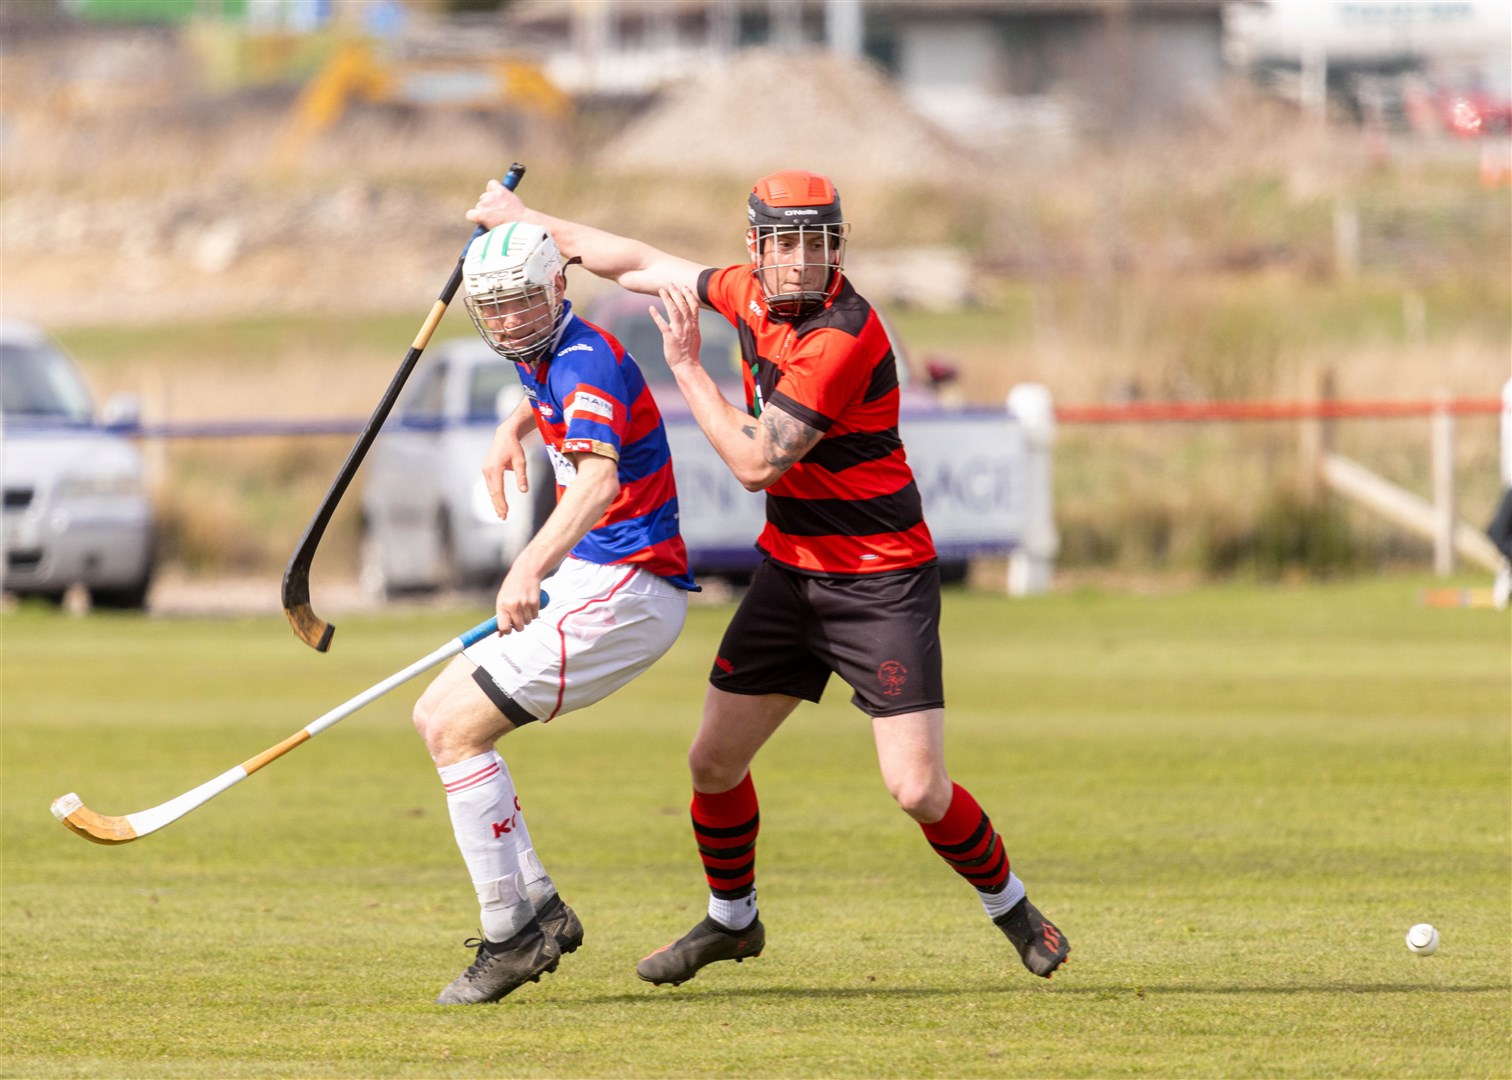 Kingussie's George Taylor-Ramsay and Oban's Ross Campbell eye up the ball.